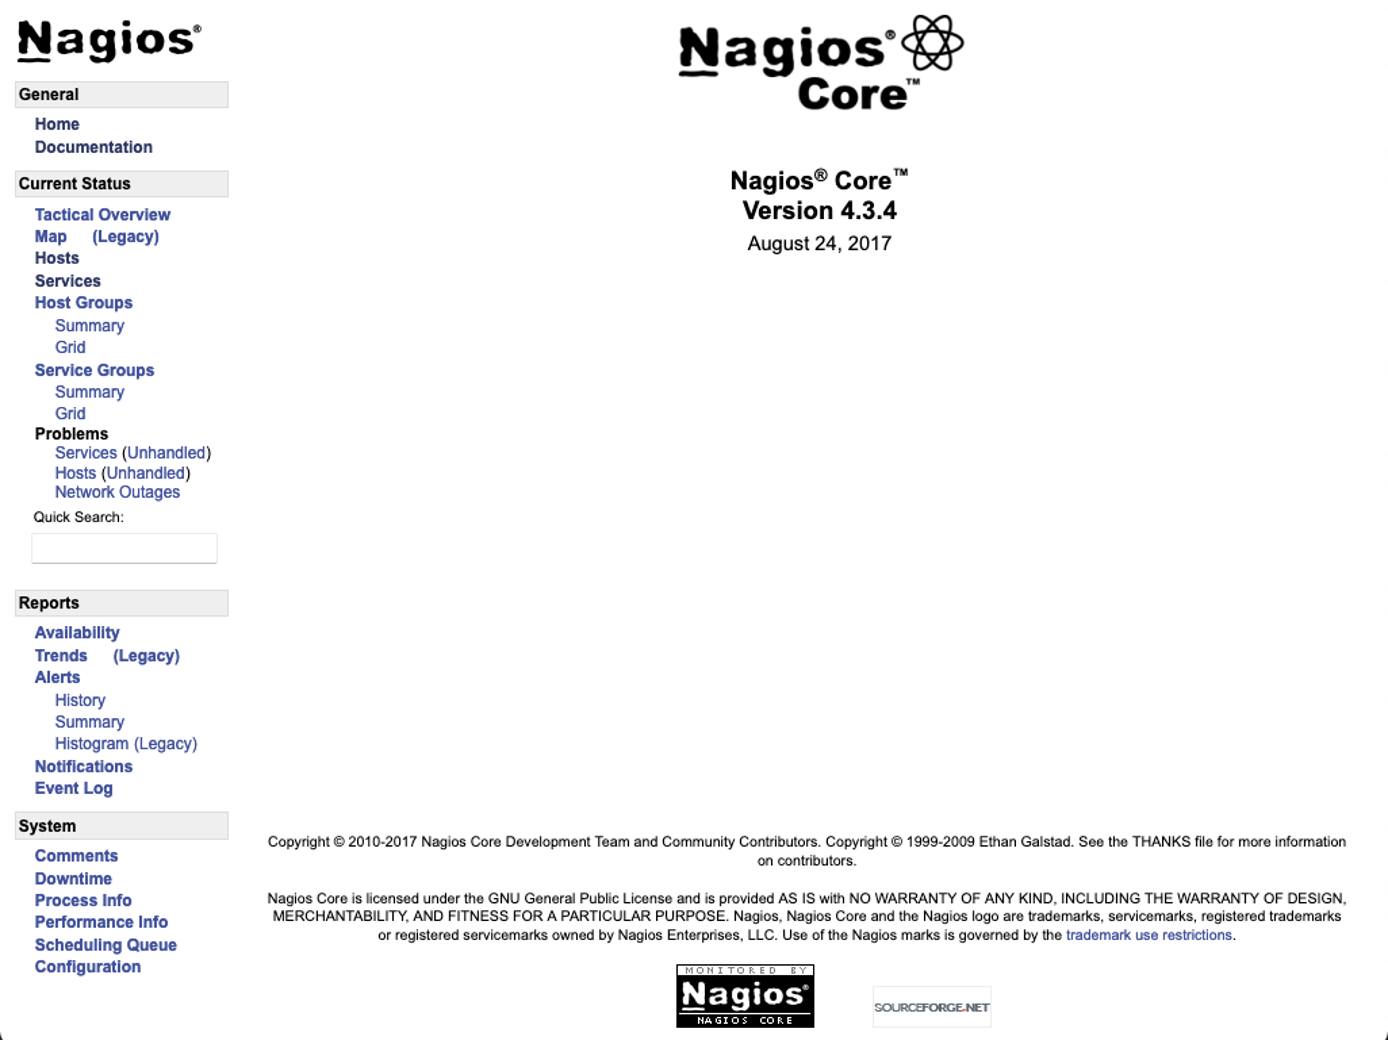 Landing page for Nagios